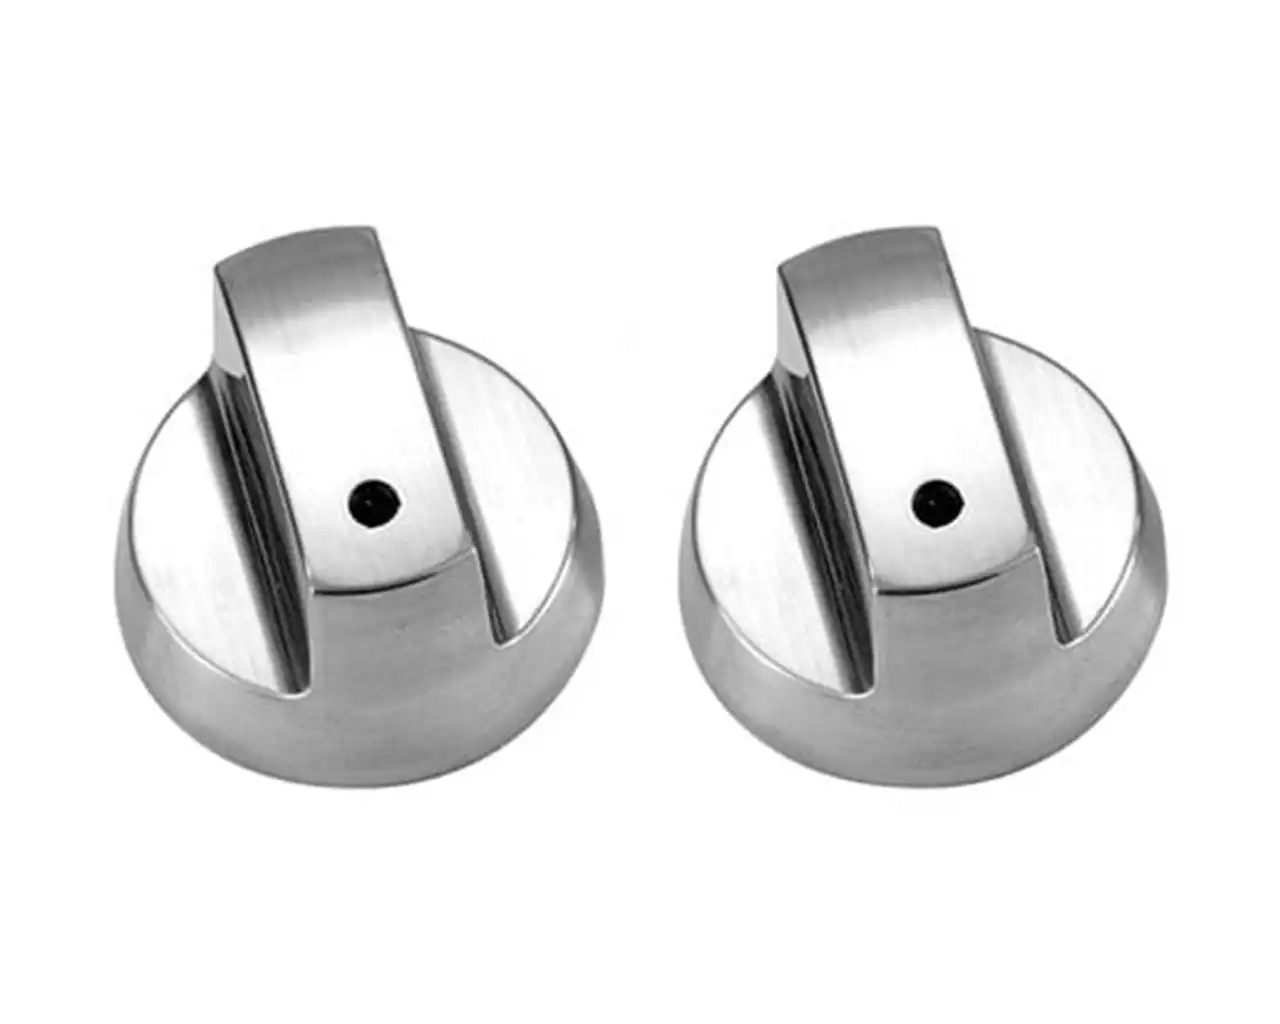 Gasmate Replacement Chrome BBQ Knobs - 2 Pack (Suits Most BBQ Brands)